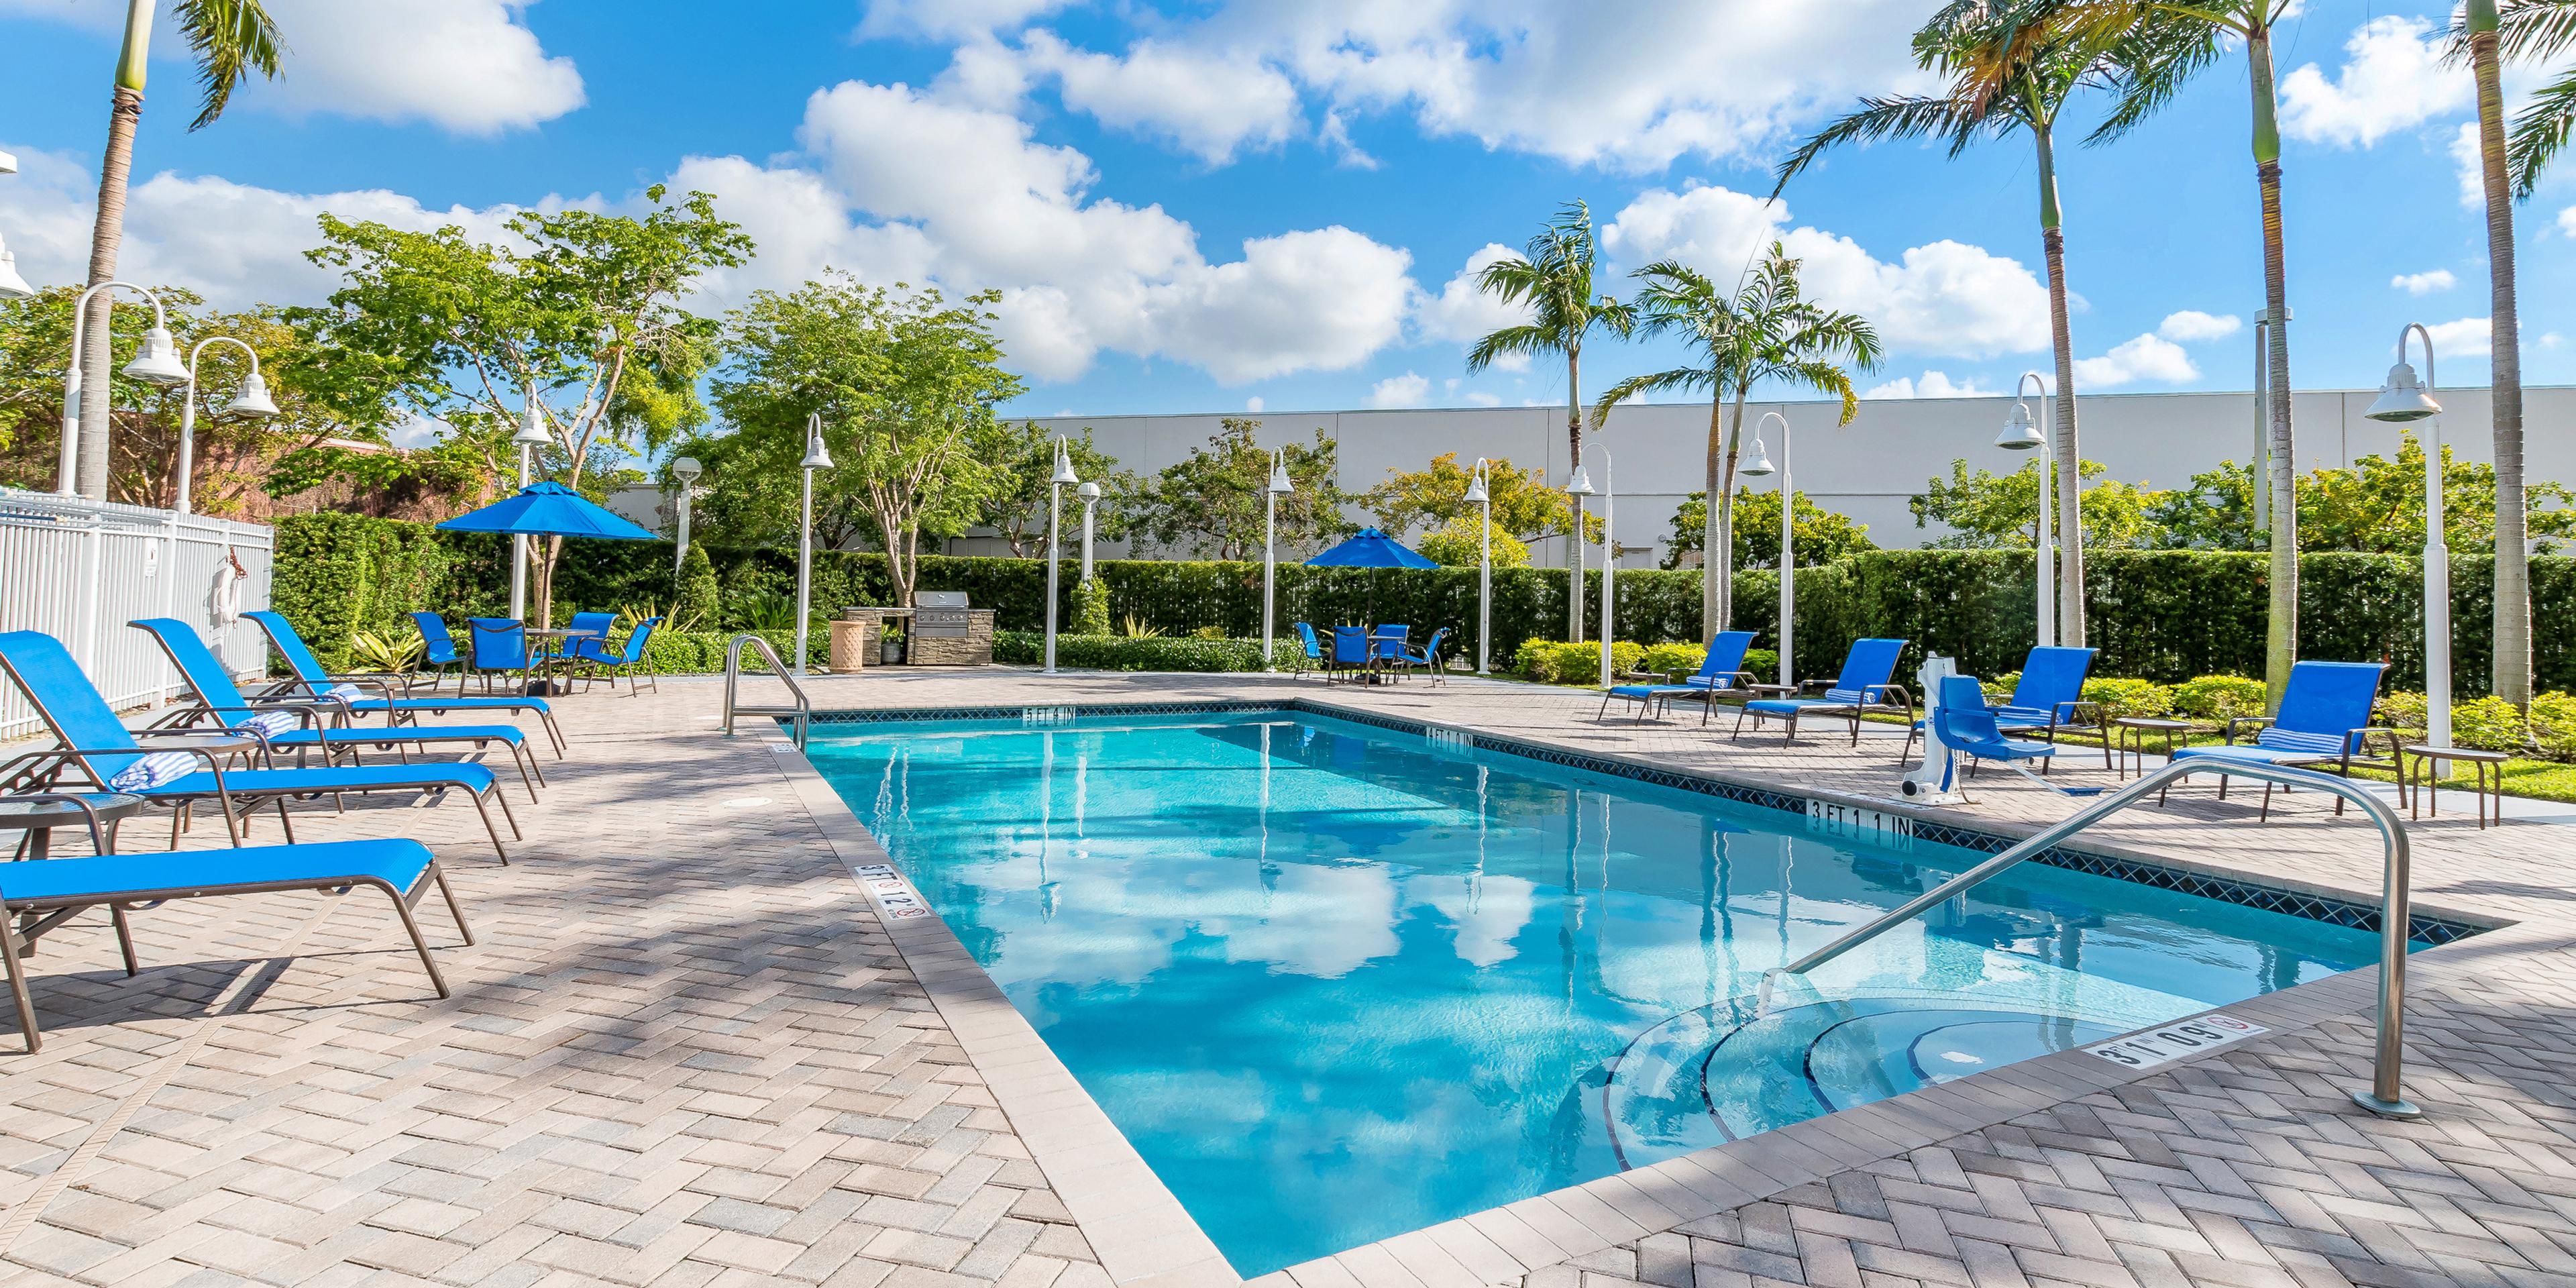 After a busy day, grab a towel and unwind beside our sparkling, inviting pool/hot tub. Dive in and enjoy a cool, refreshing pick-me-up courtesy of your friends at the Holiday Inn Express & Suites Miami-Kendall.